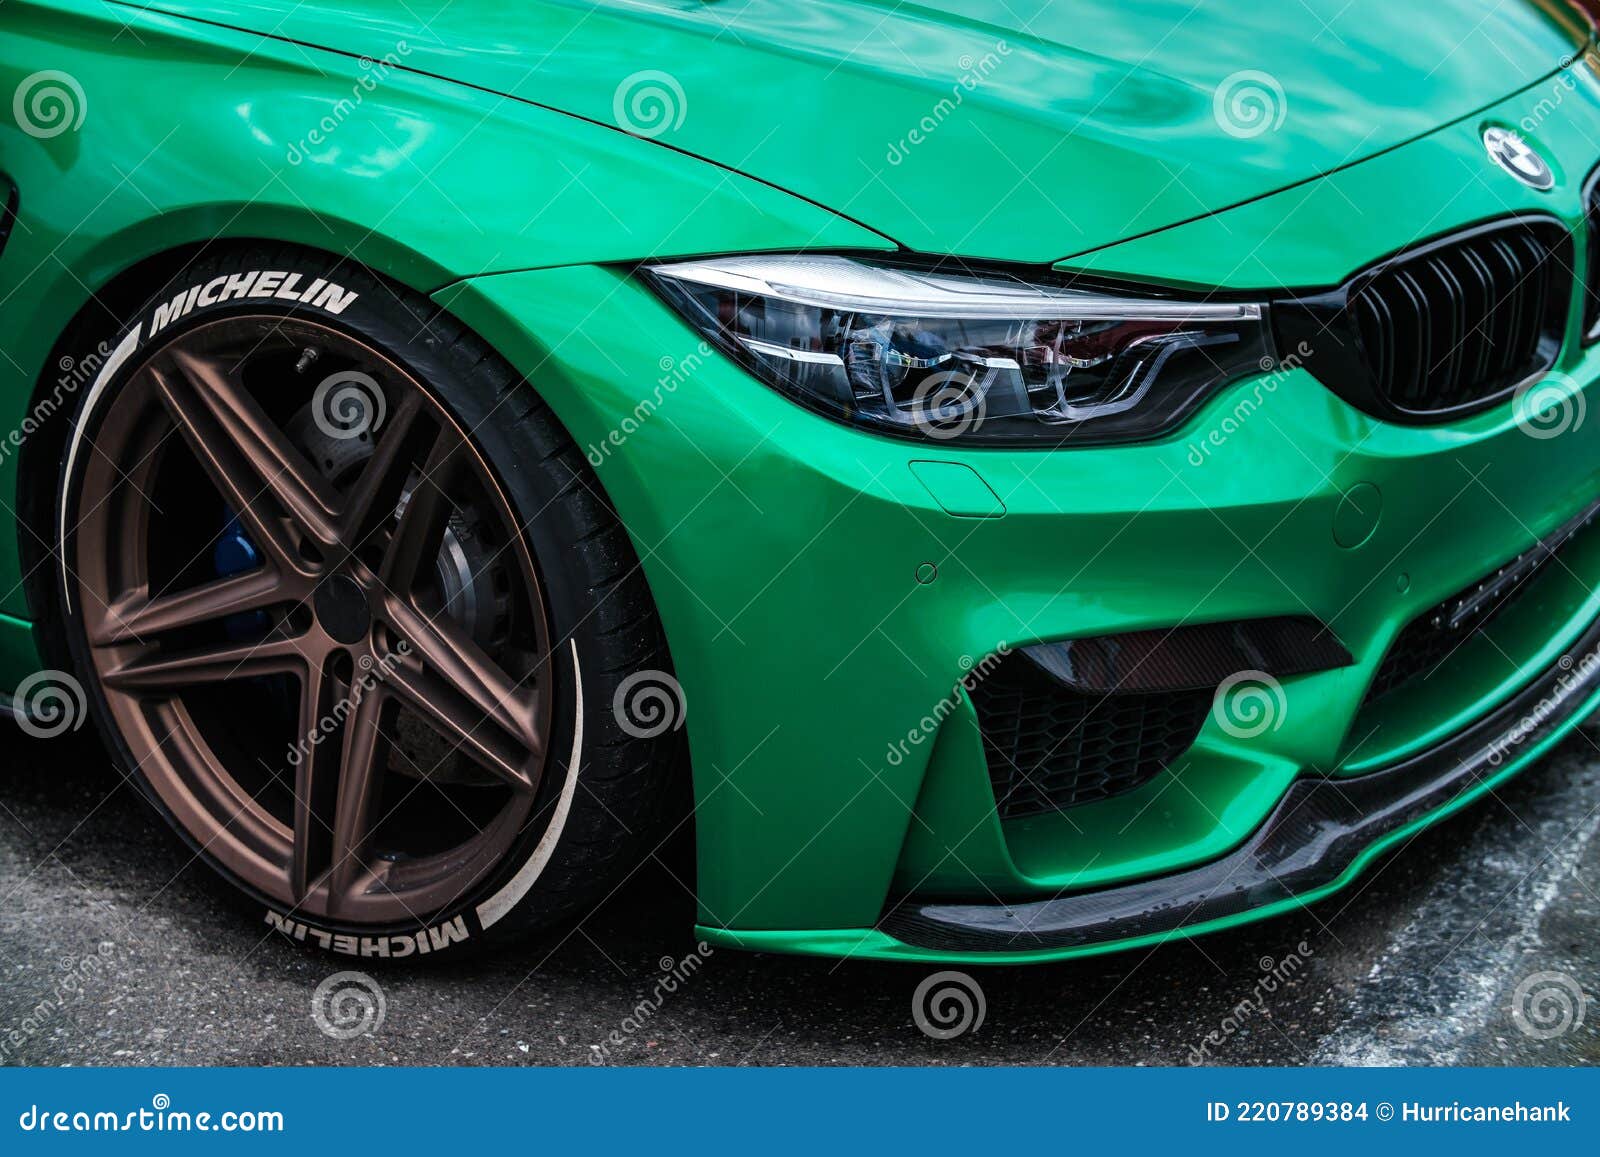 BMW M3 F80 Car Wrapped in Green Vinyl Wrap with AC Schnitzer Wheels with Low Profile Tires on Editorial Stock Image - Image ceramic, model: 220789384